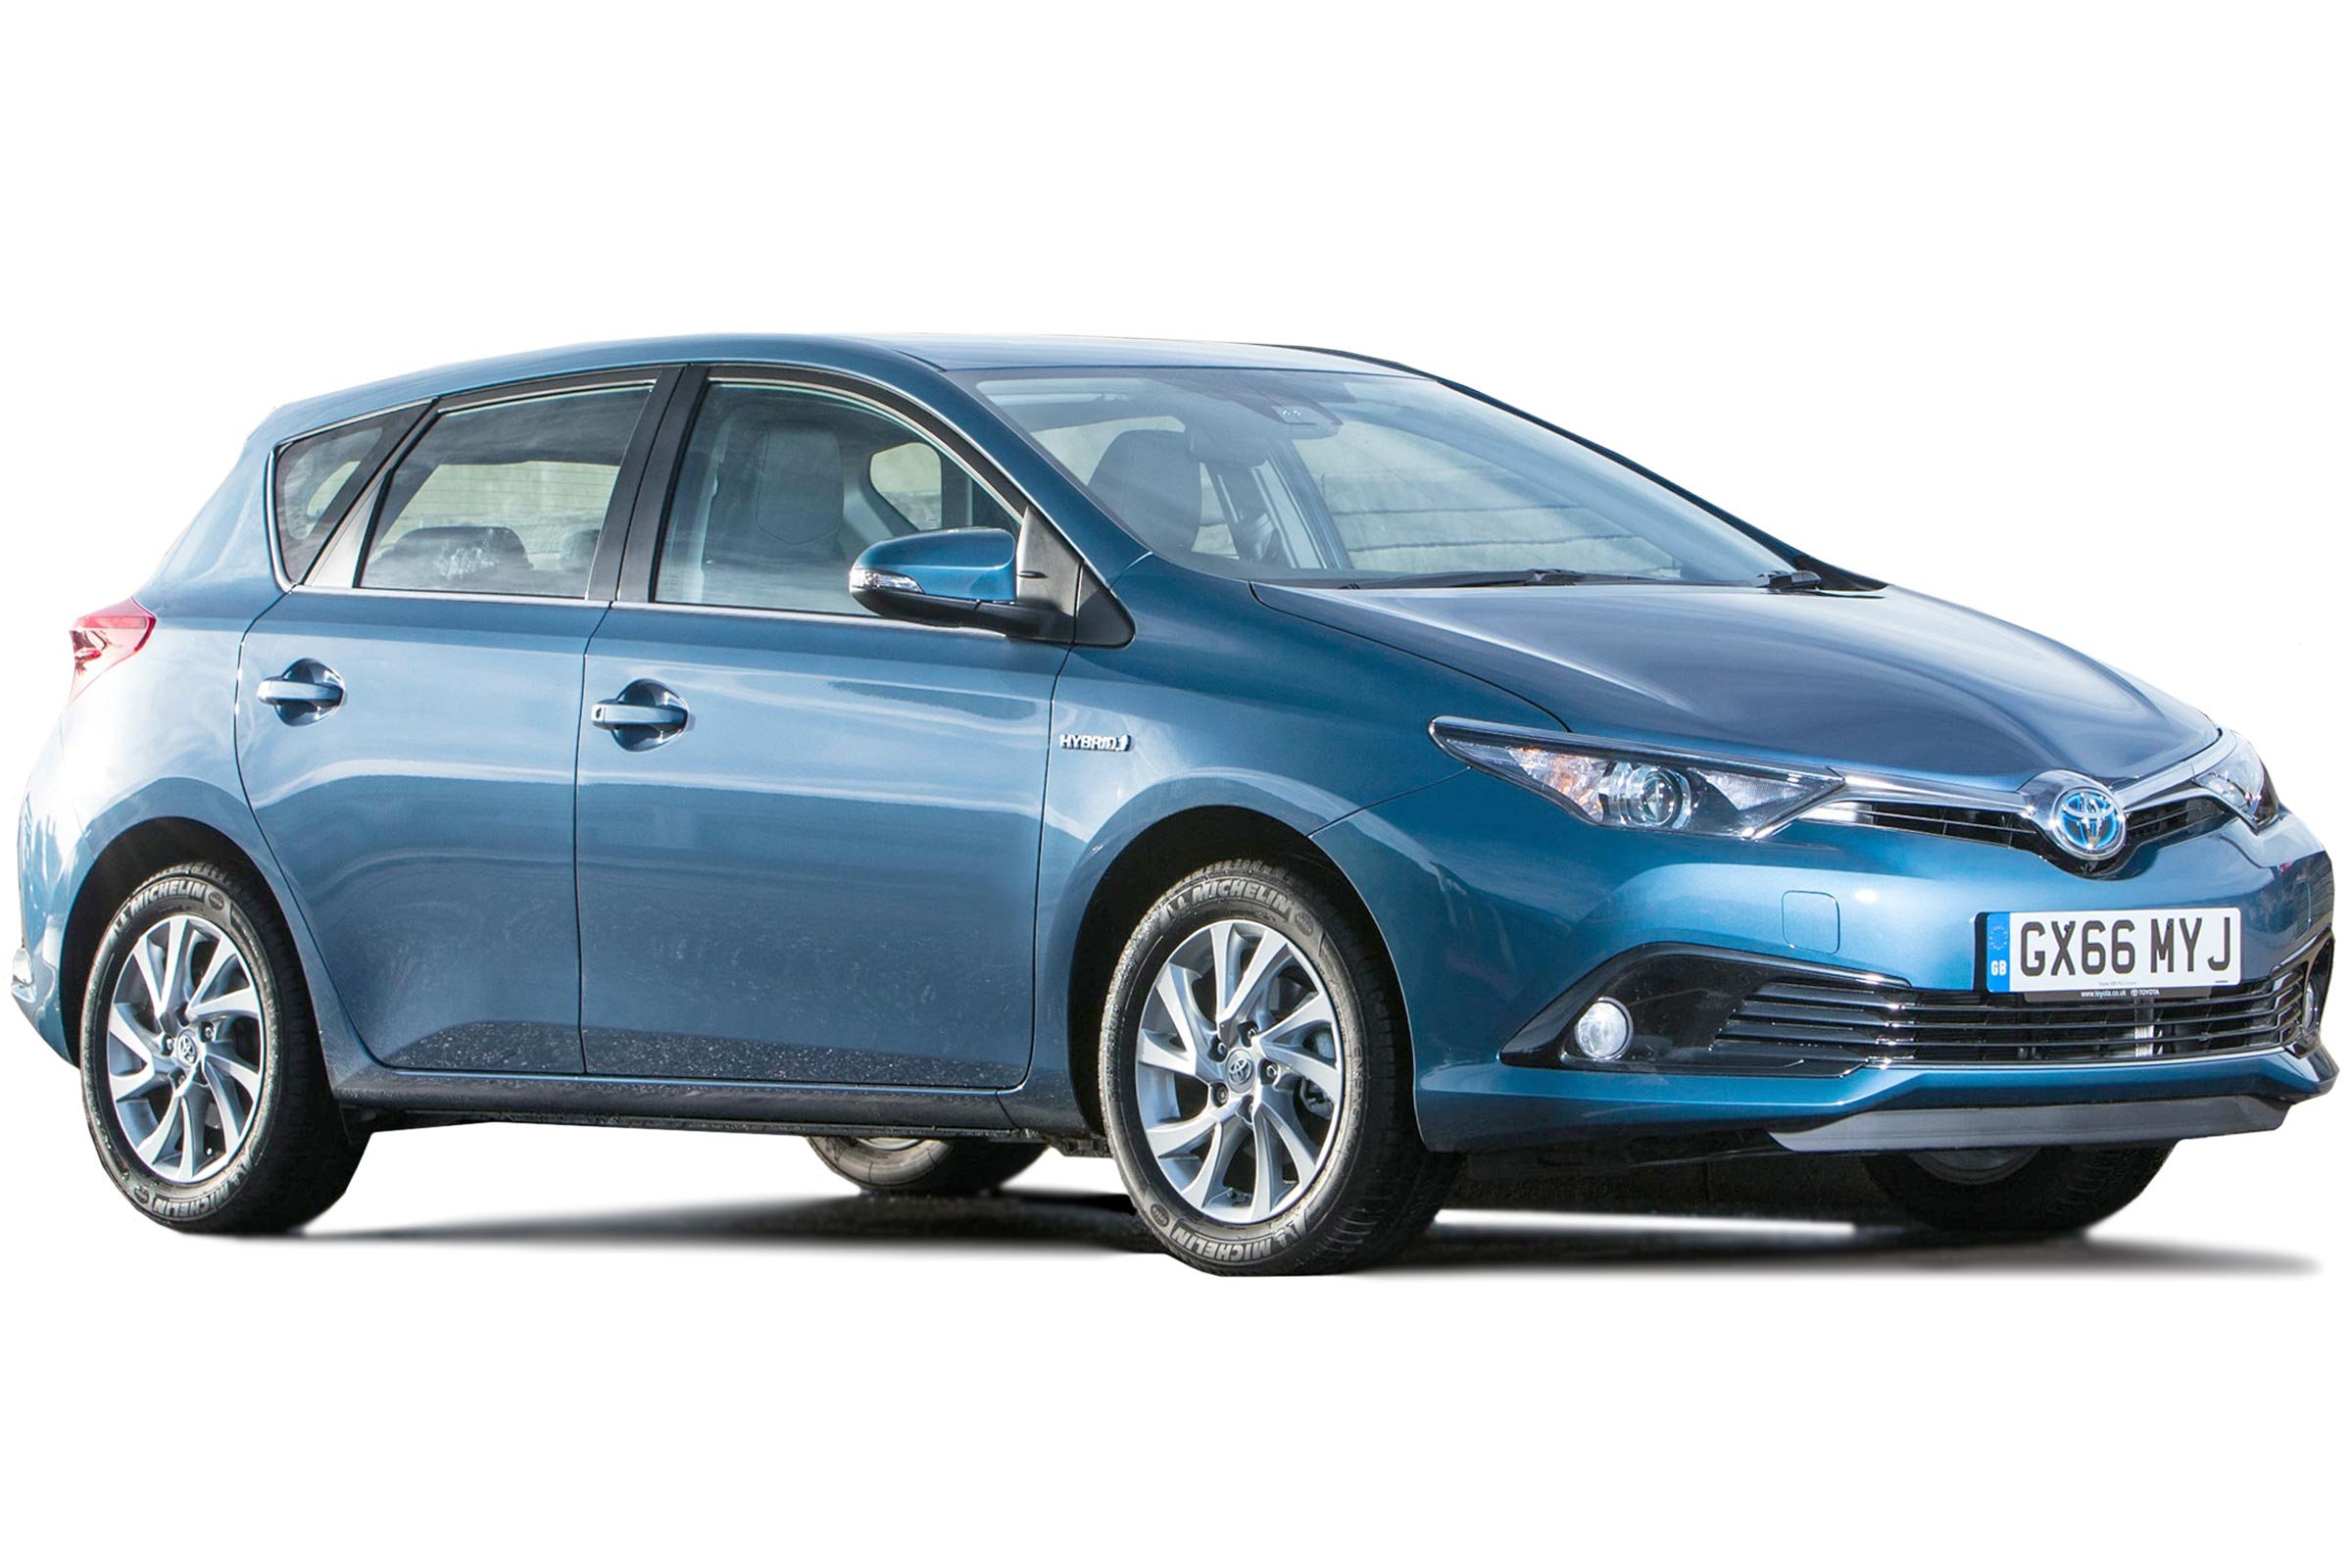 https://mediacloud.carbuyer.co.uk/image/private/s--XlZ5Ye5S--/v1584464030/carbuyer/car_images/toyota-auris-hybrid.jpg